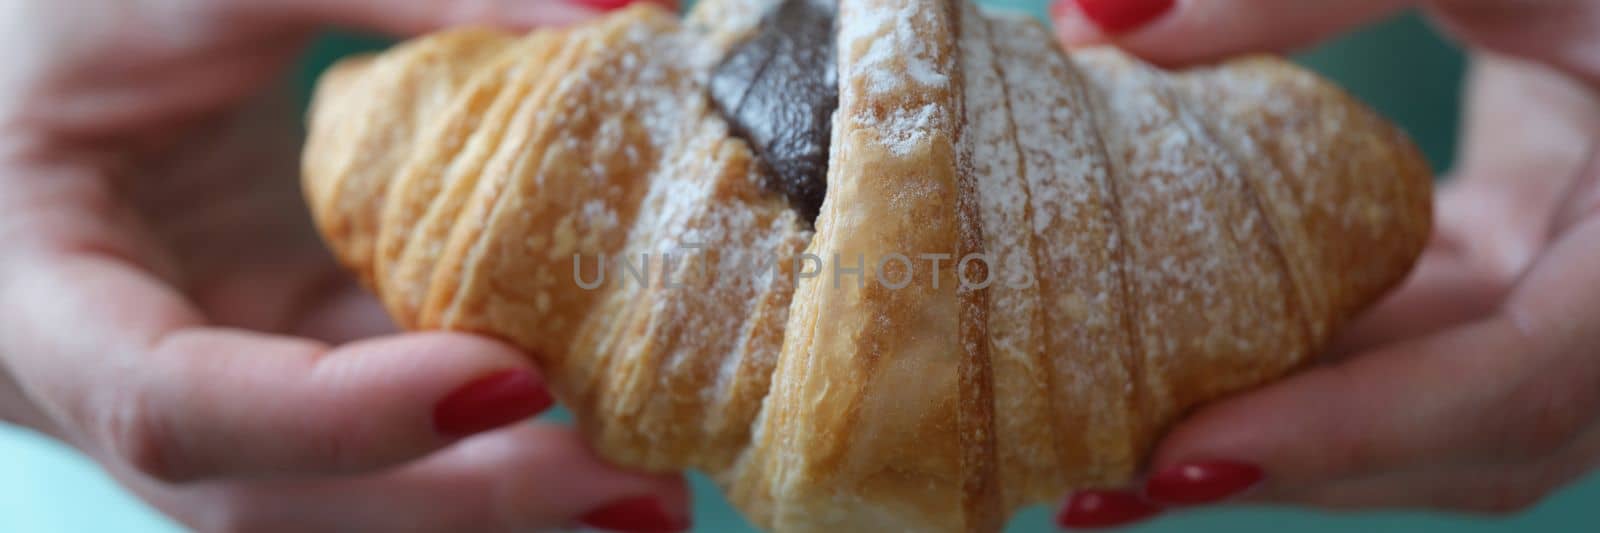 Hand shows a fresh croissant with chocolate and powdered sugar. Fresh sweet croissant concept